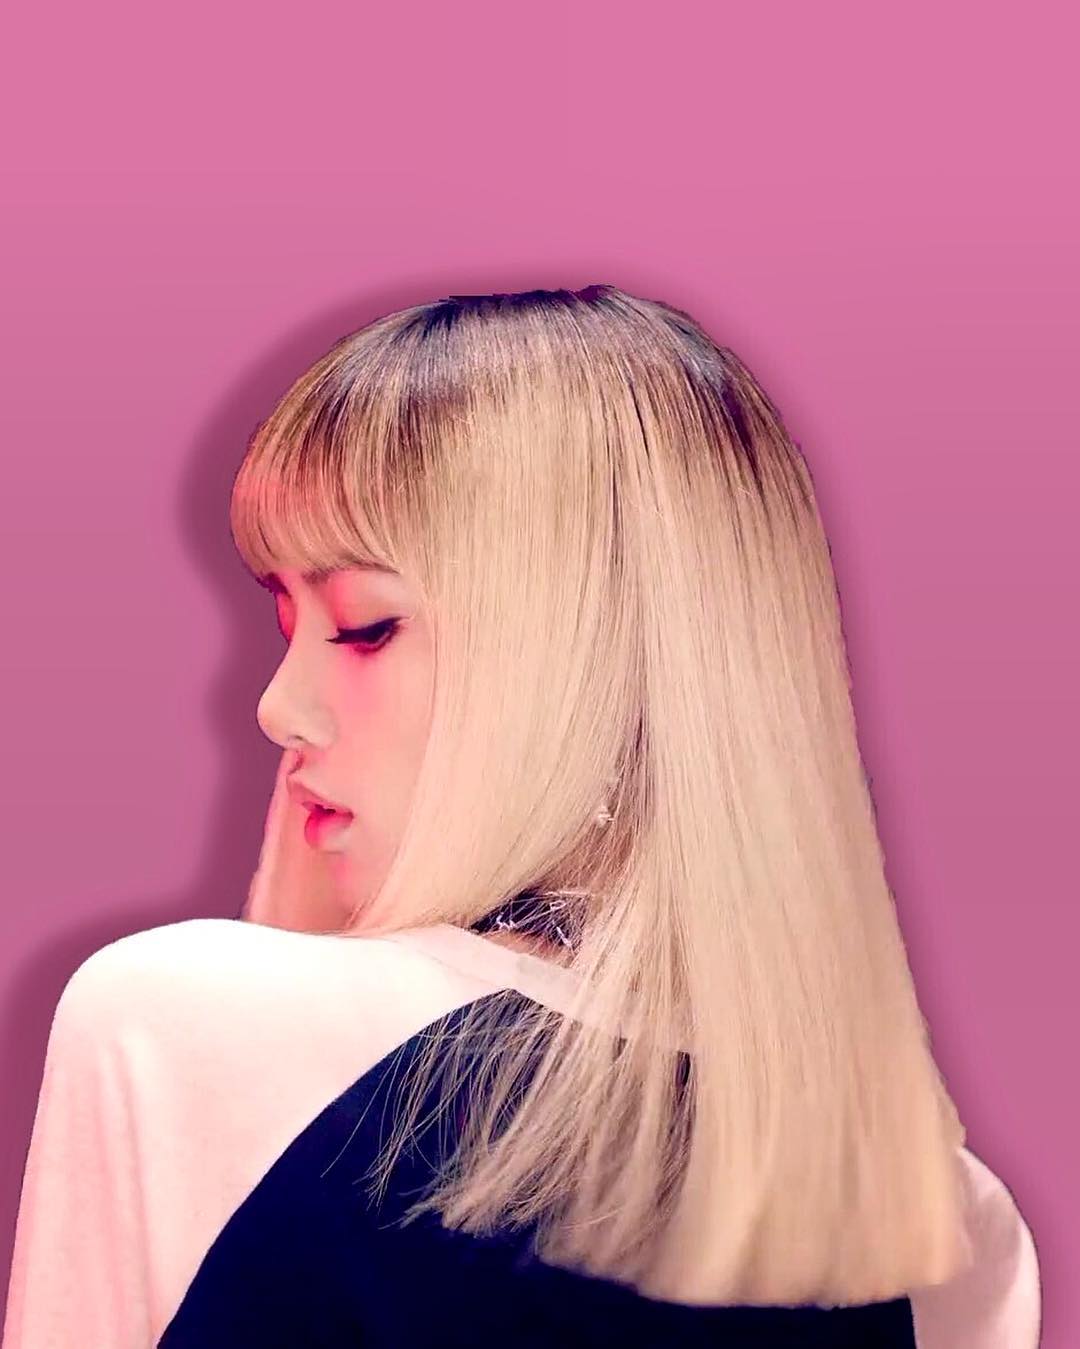 Blackpink Lisa Cutest Wallpapers Thewaofam Wallpapers Thewaofam